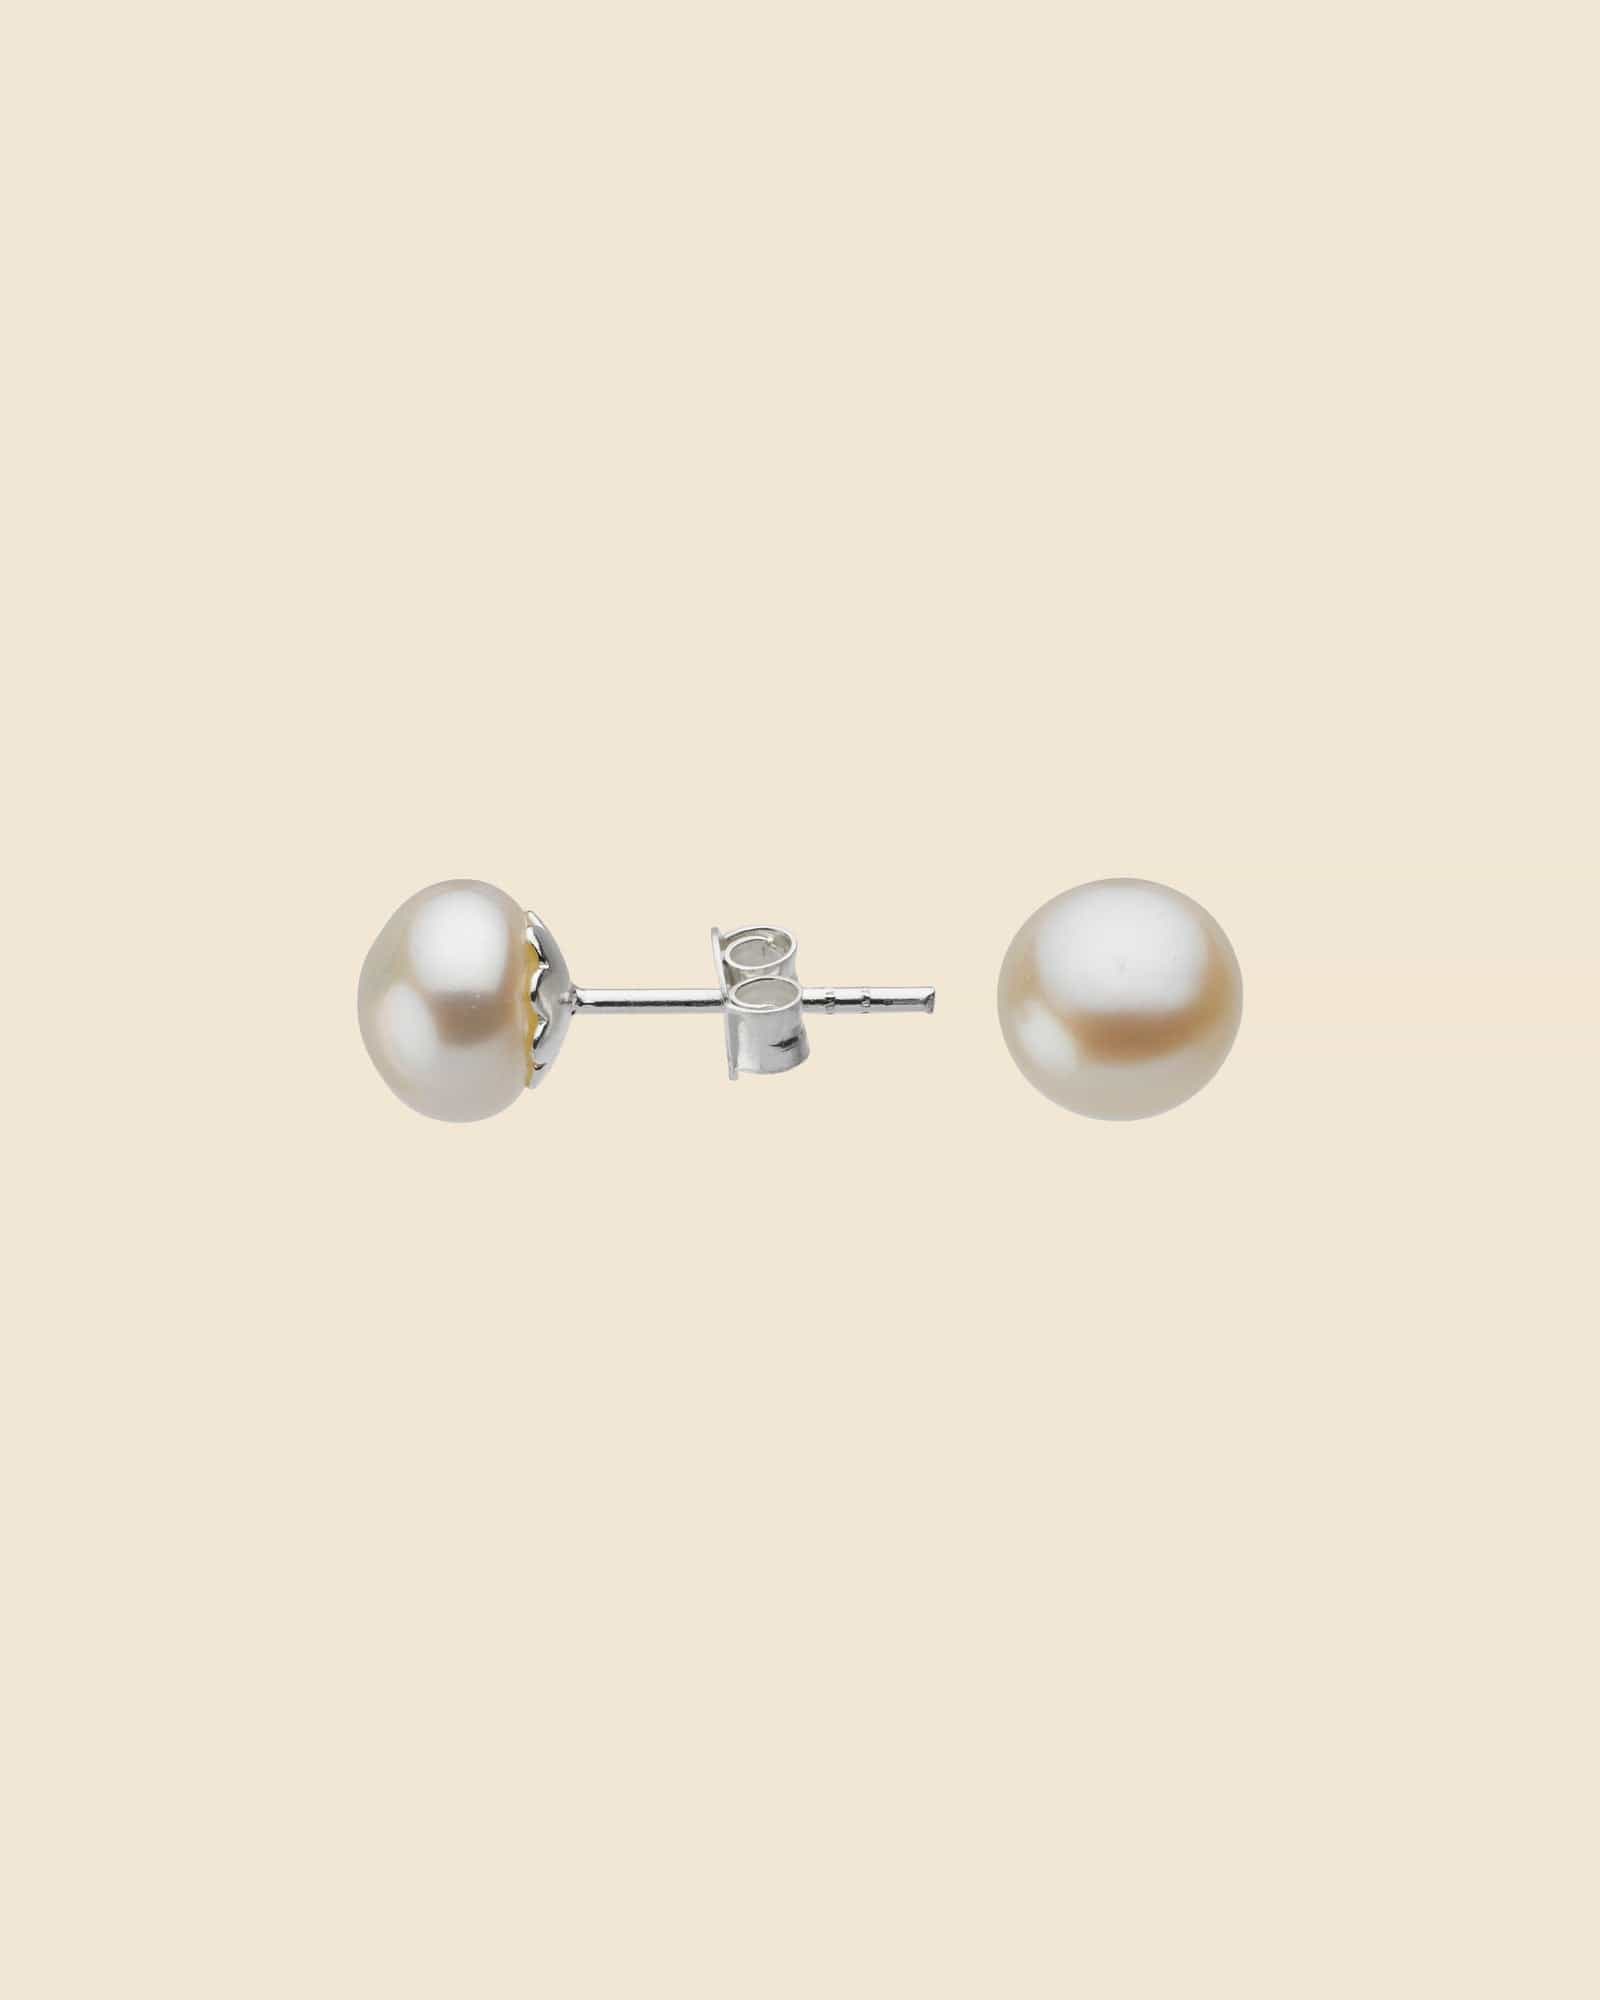 8mm Ivory Freshwater Pearl and Sterling Silver Studs